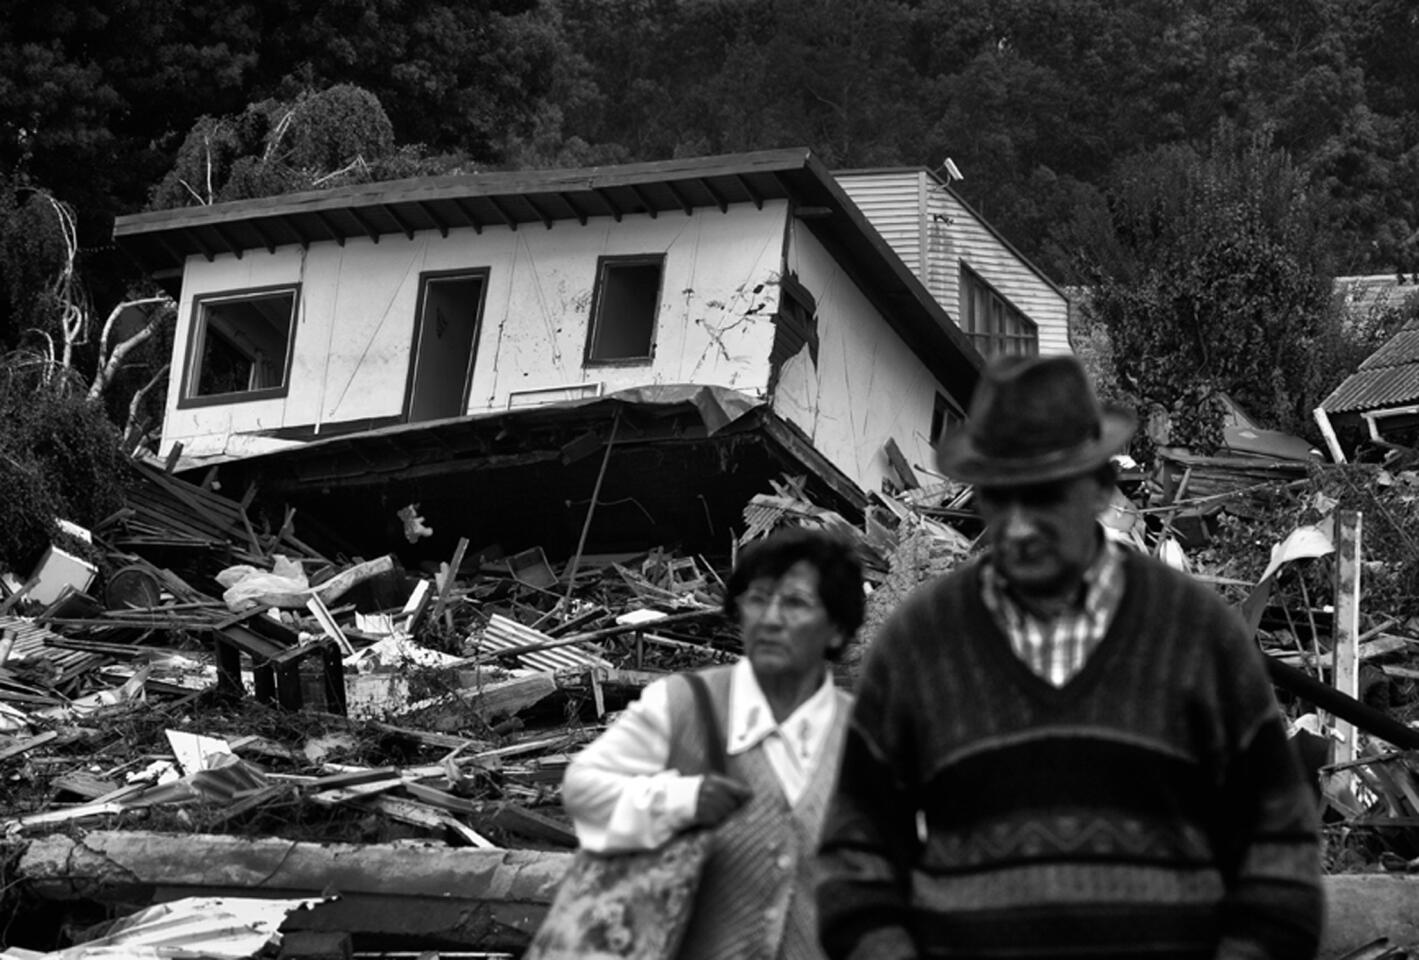 On Feb. 27, 2010, an 8.8 earthquake struck the central coast of Chile, triggering a tsunami. The city of Constitución was devastated, with buildings swept from their foundations, sometimes more than a kilometer inland.